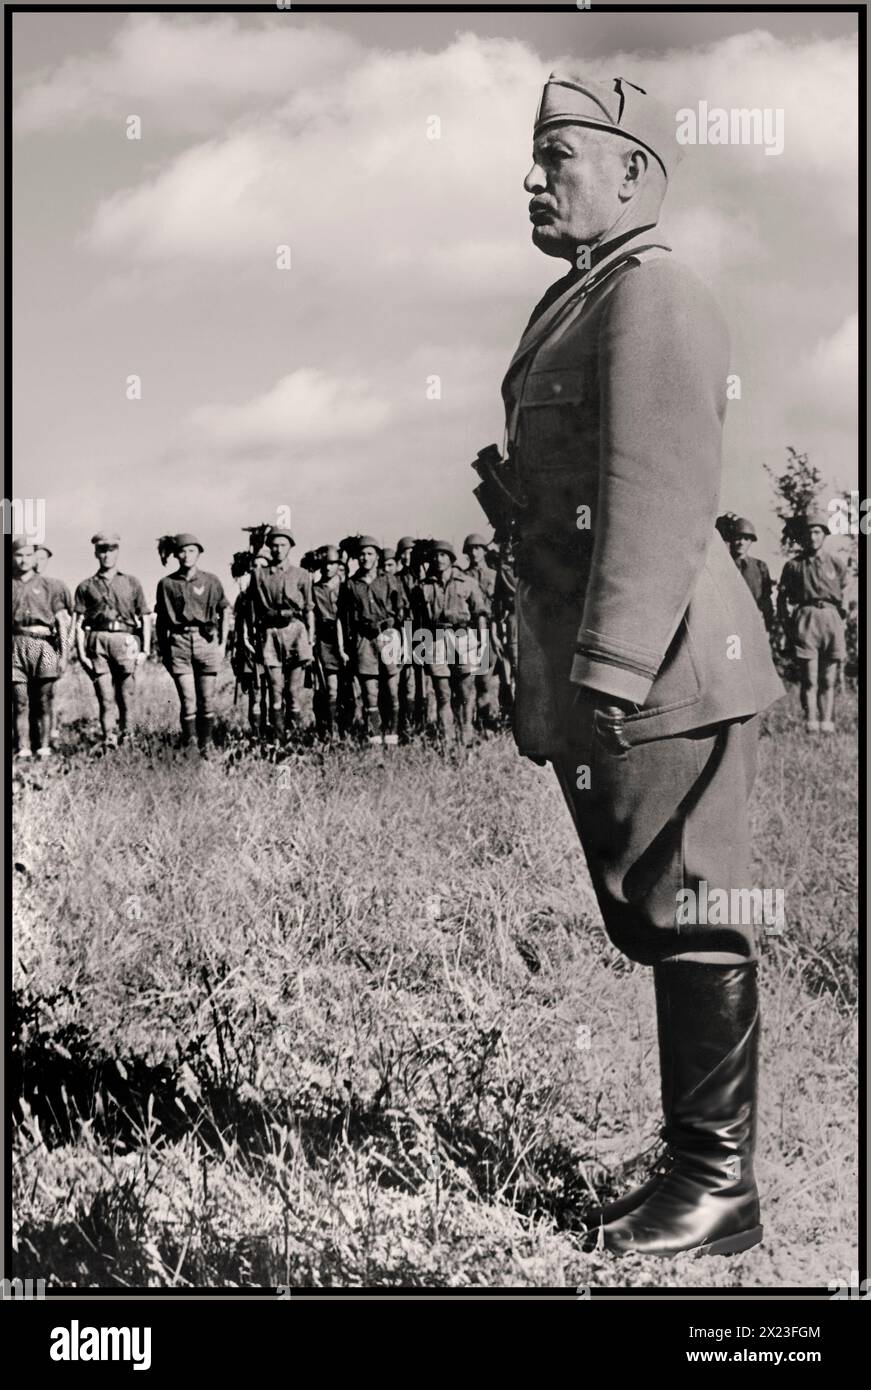 Benito Mussolini IL DULCE in military uniform inspecting a division of Axis Italian riflemen soldiers on the Adriatic front Italy. World War II Second World War WW2 August 1944 Fascist Mussolini made a crucial and for him fatal mistake of becoming part of the 'Axis of Evil' with Nazi Adolf Hitler In World War II Stock Photo